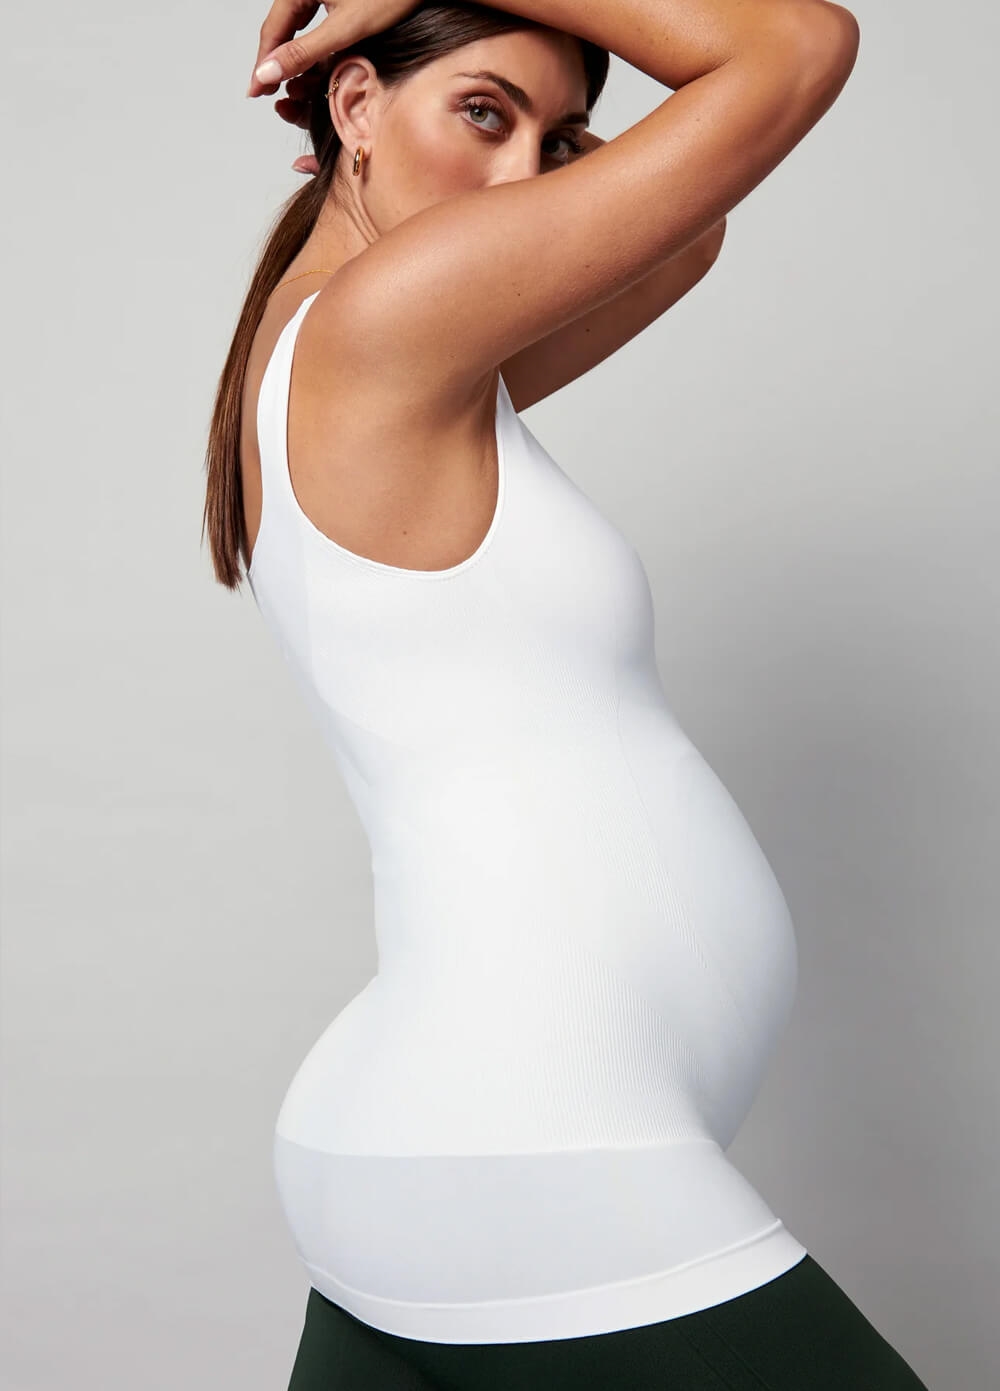 Blanqi Bodystyler Belly Support Maternity Support Tank Top - White